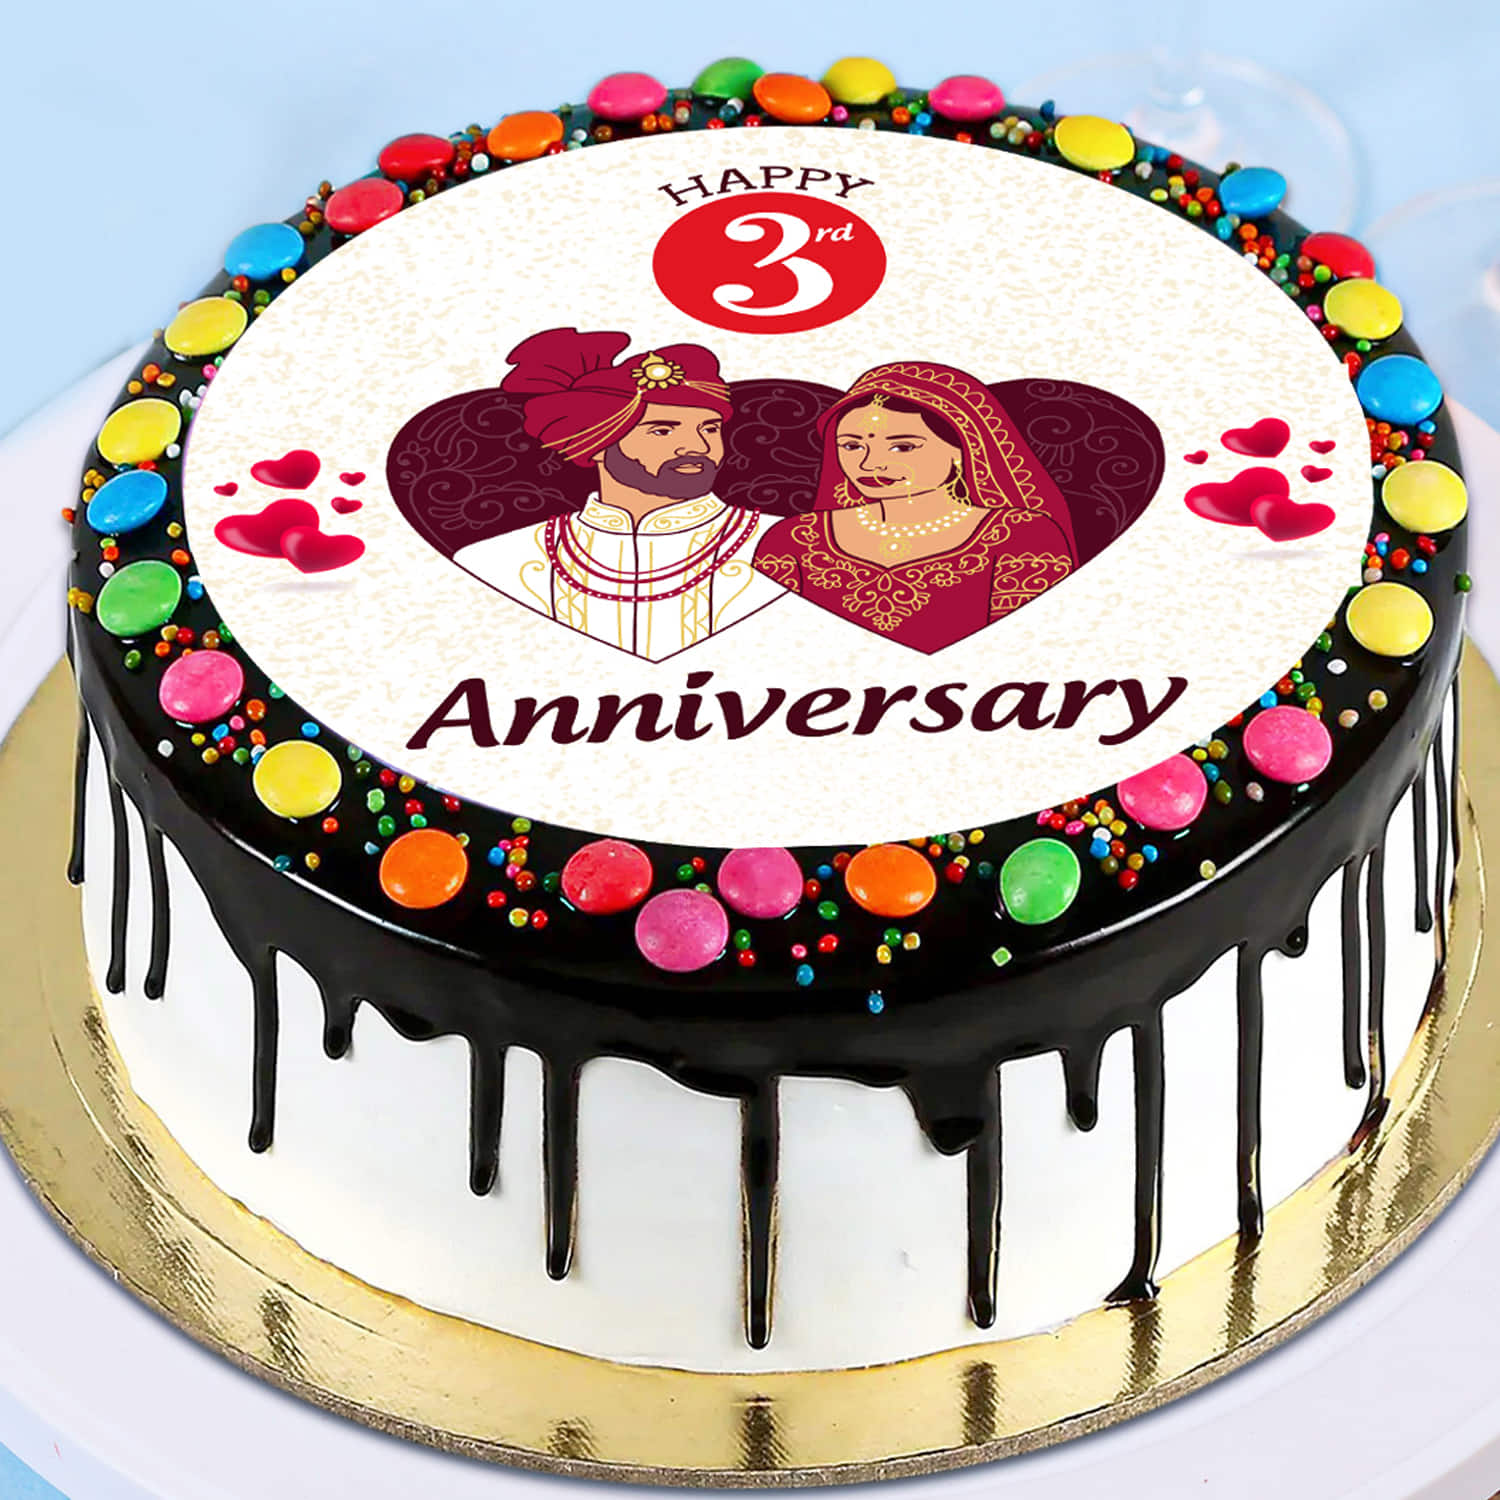 Traditional Couple 1 Kg Cake by Cake Square Chennai | ChocolateTruffle Cakes  | 1 Hour Delivery - Cake Square Chennai | Cake Shop in Chennai